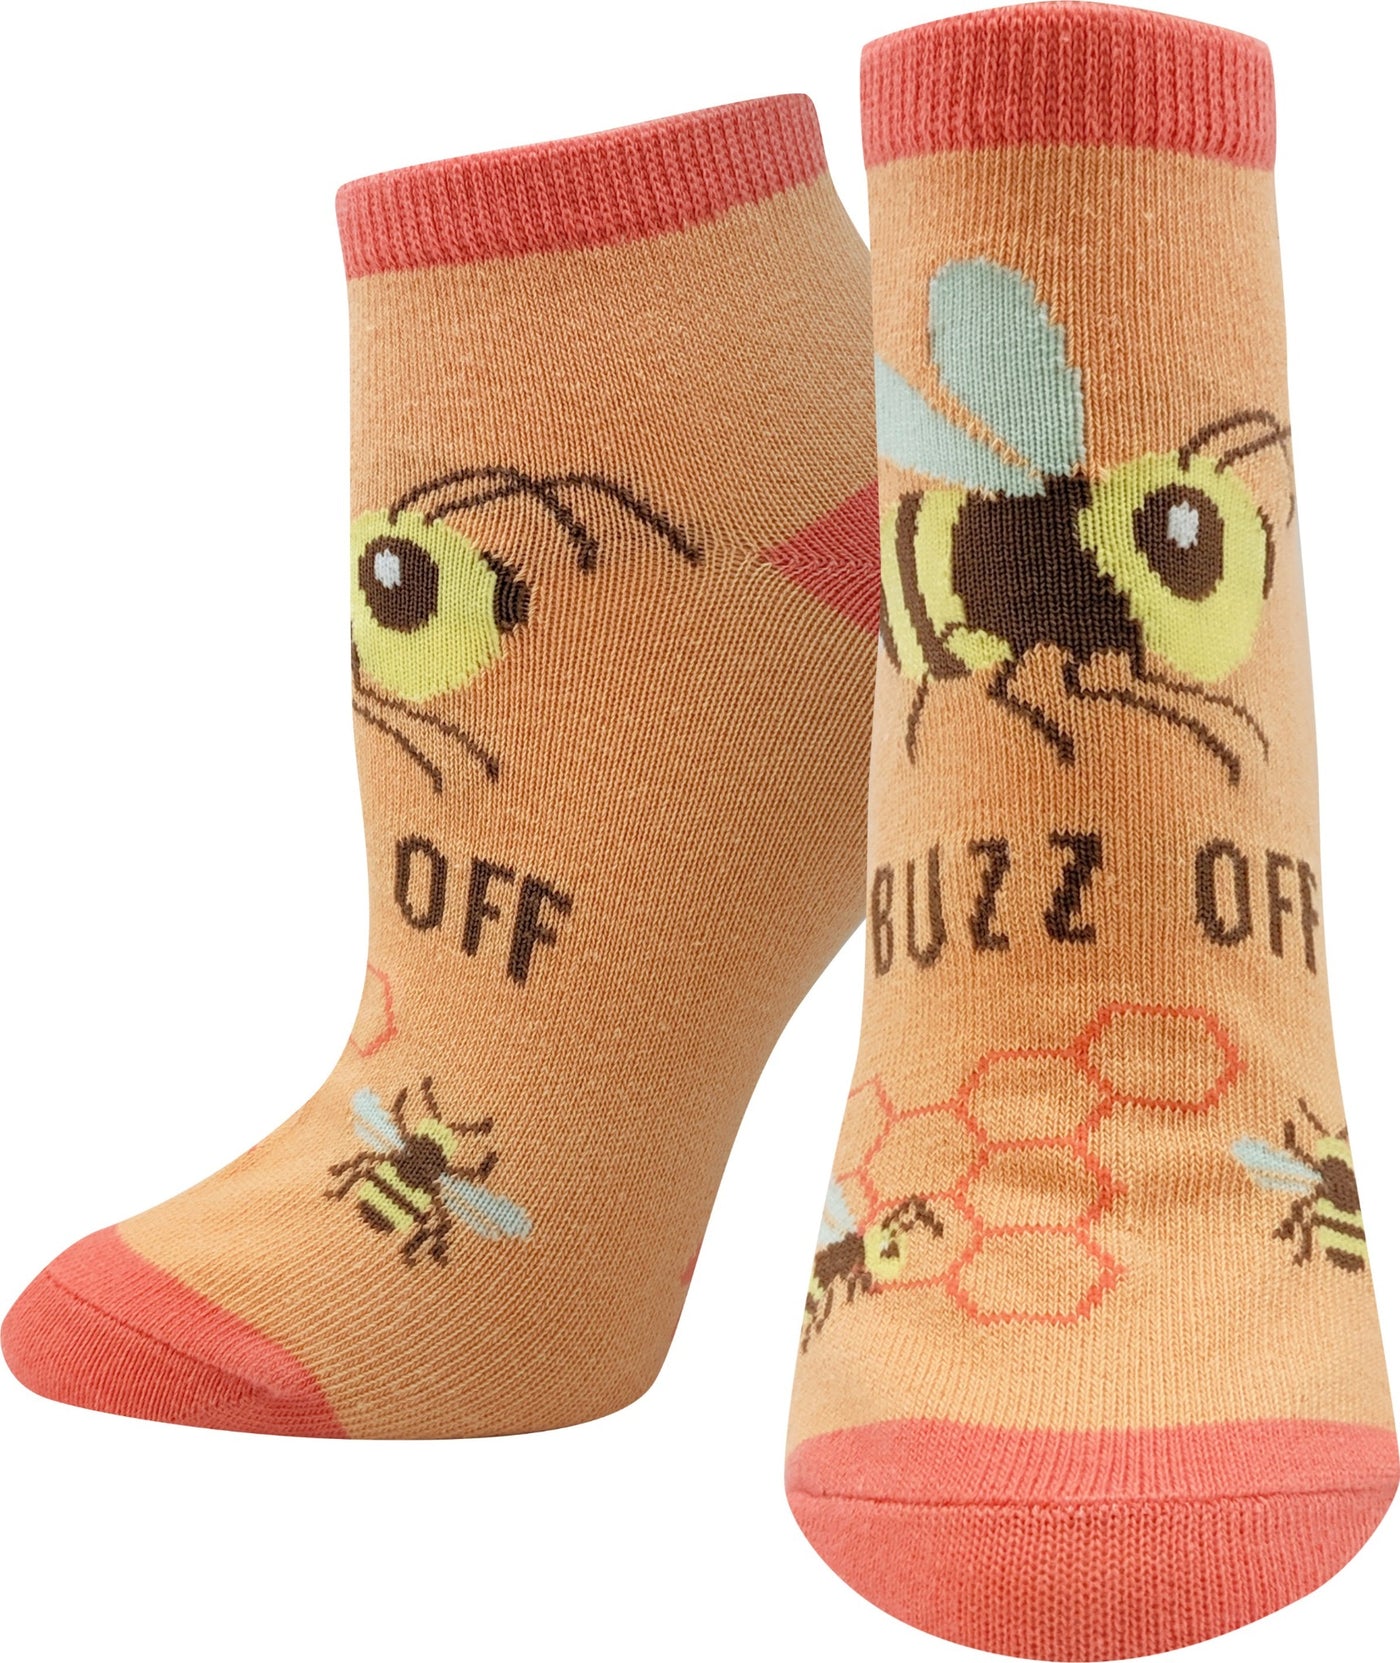 Buzz Off Ankle Socks